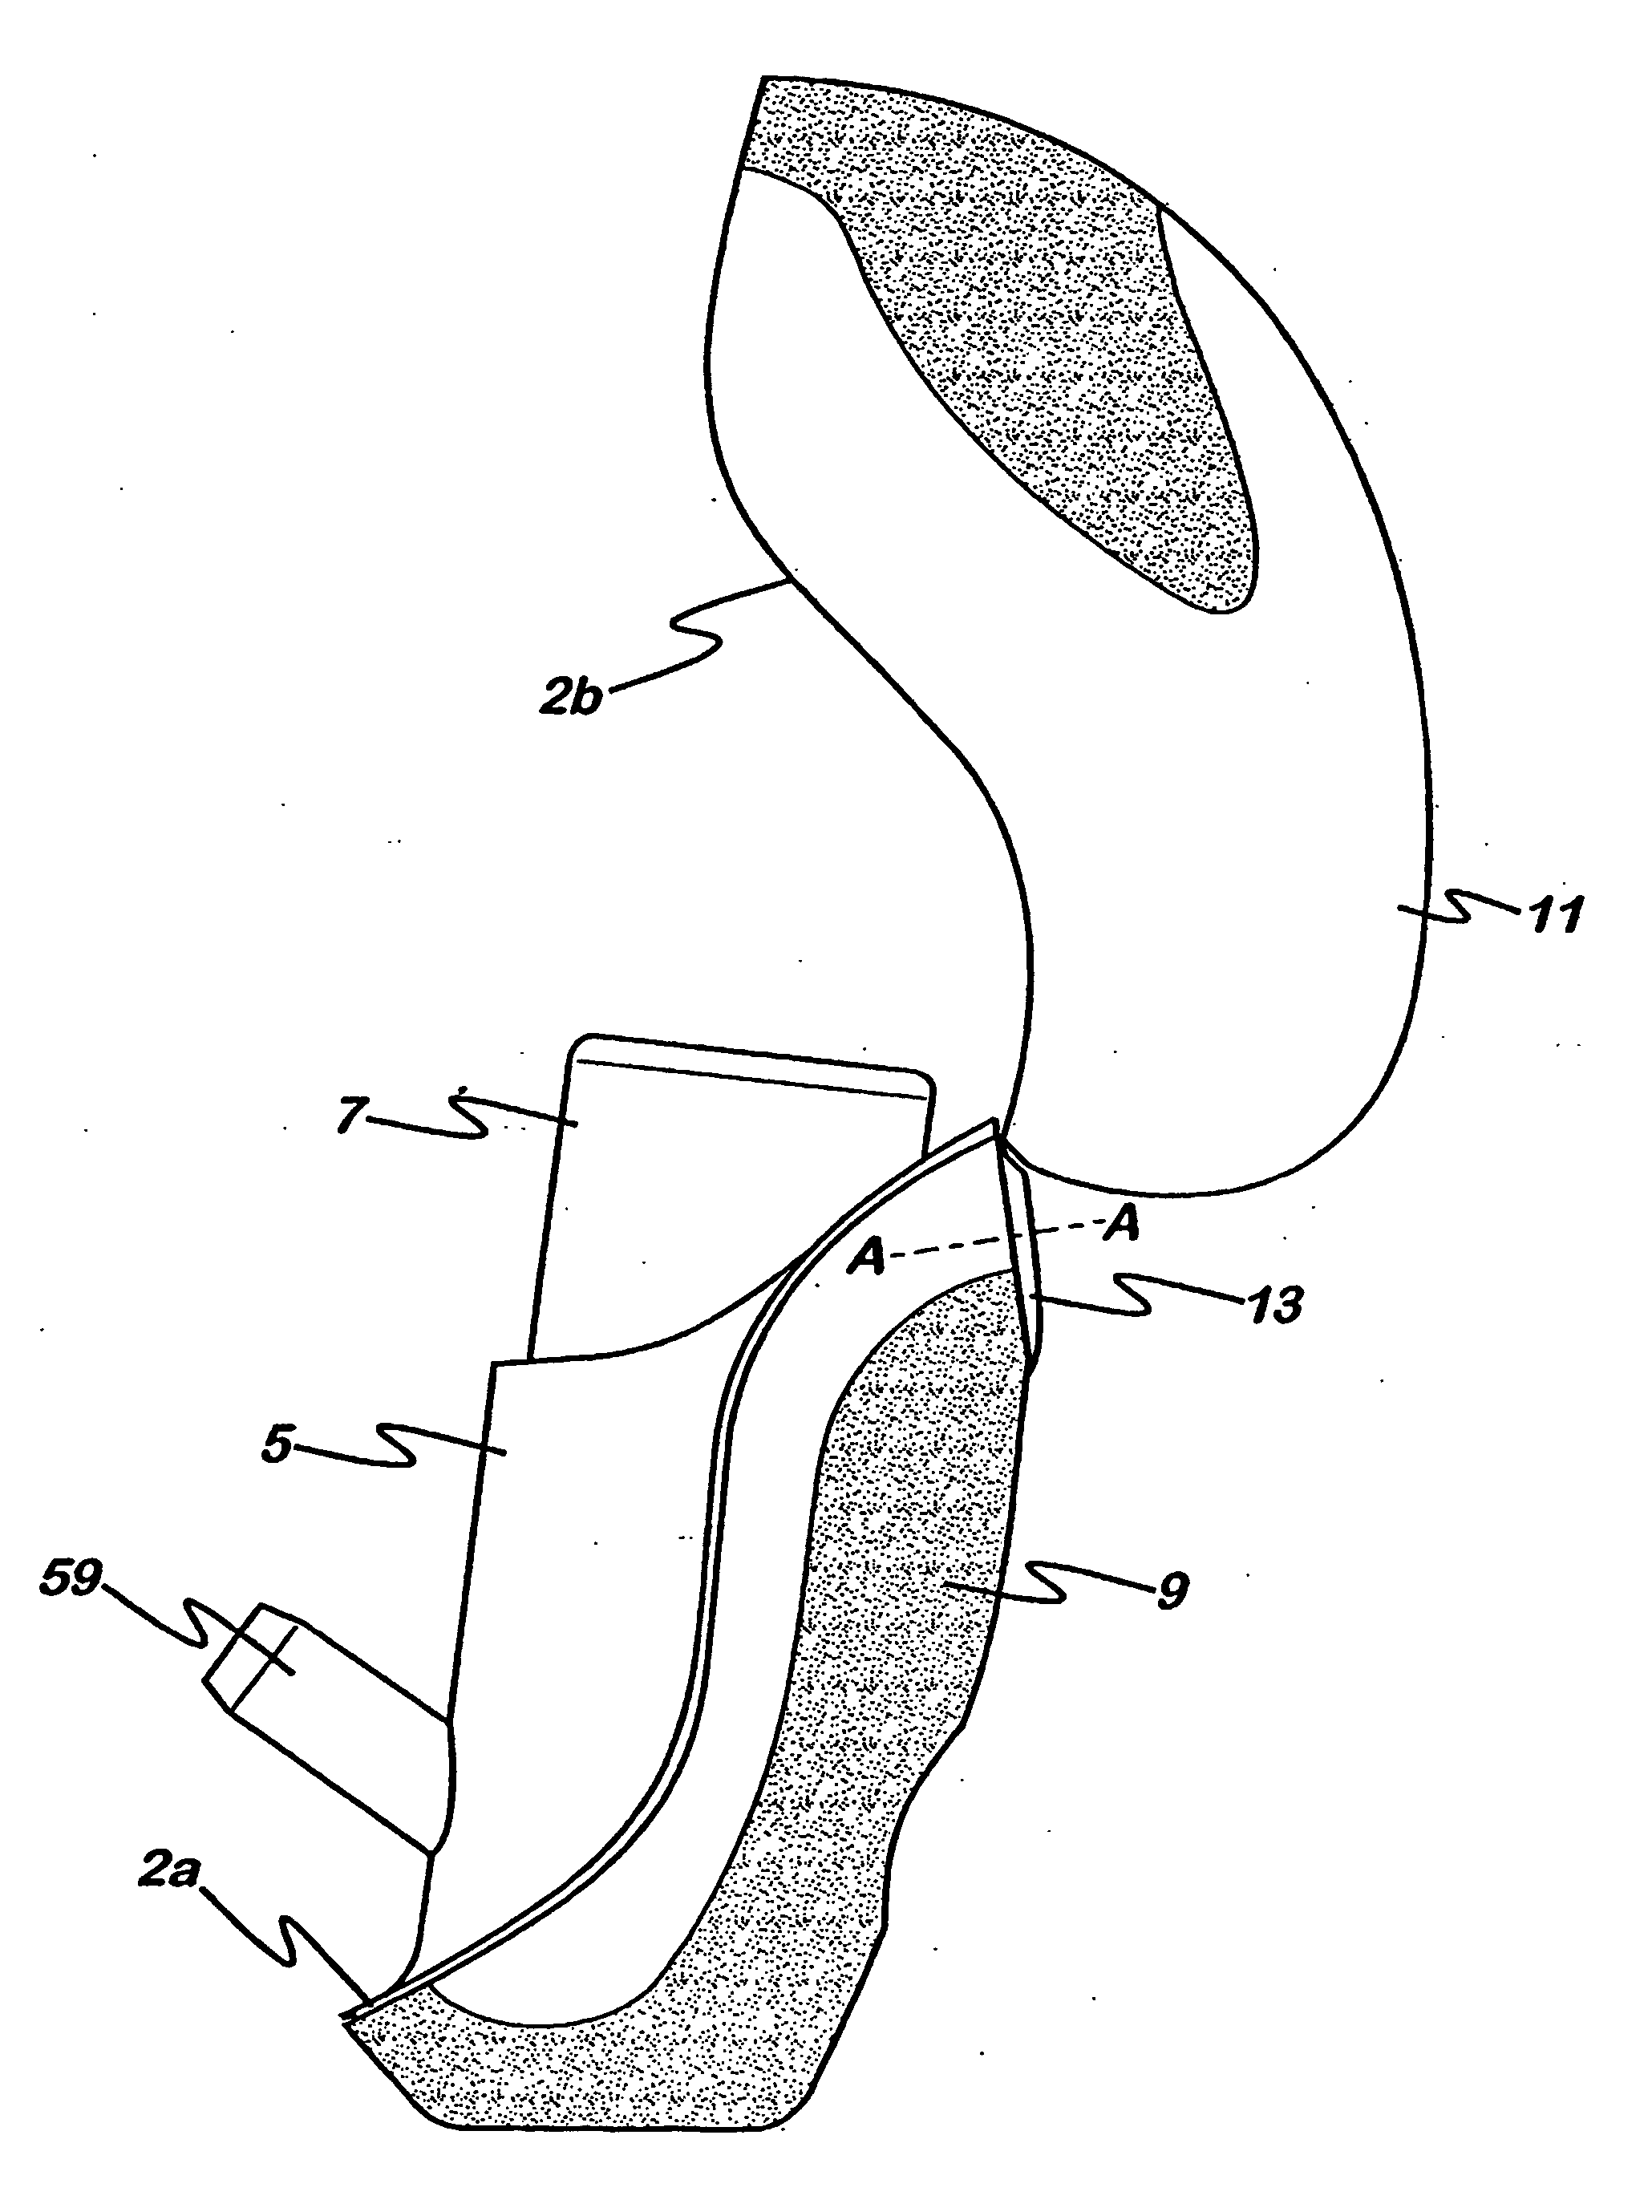 Holder for a dispensing container system